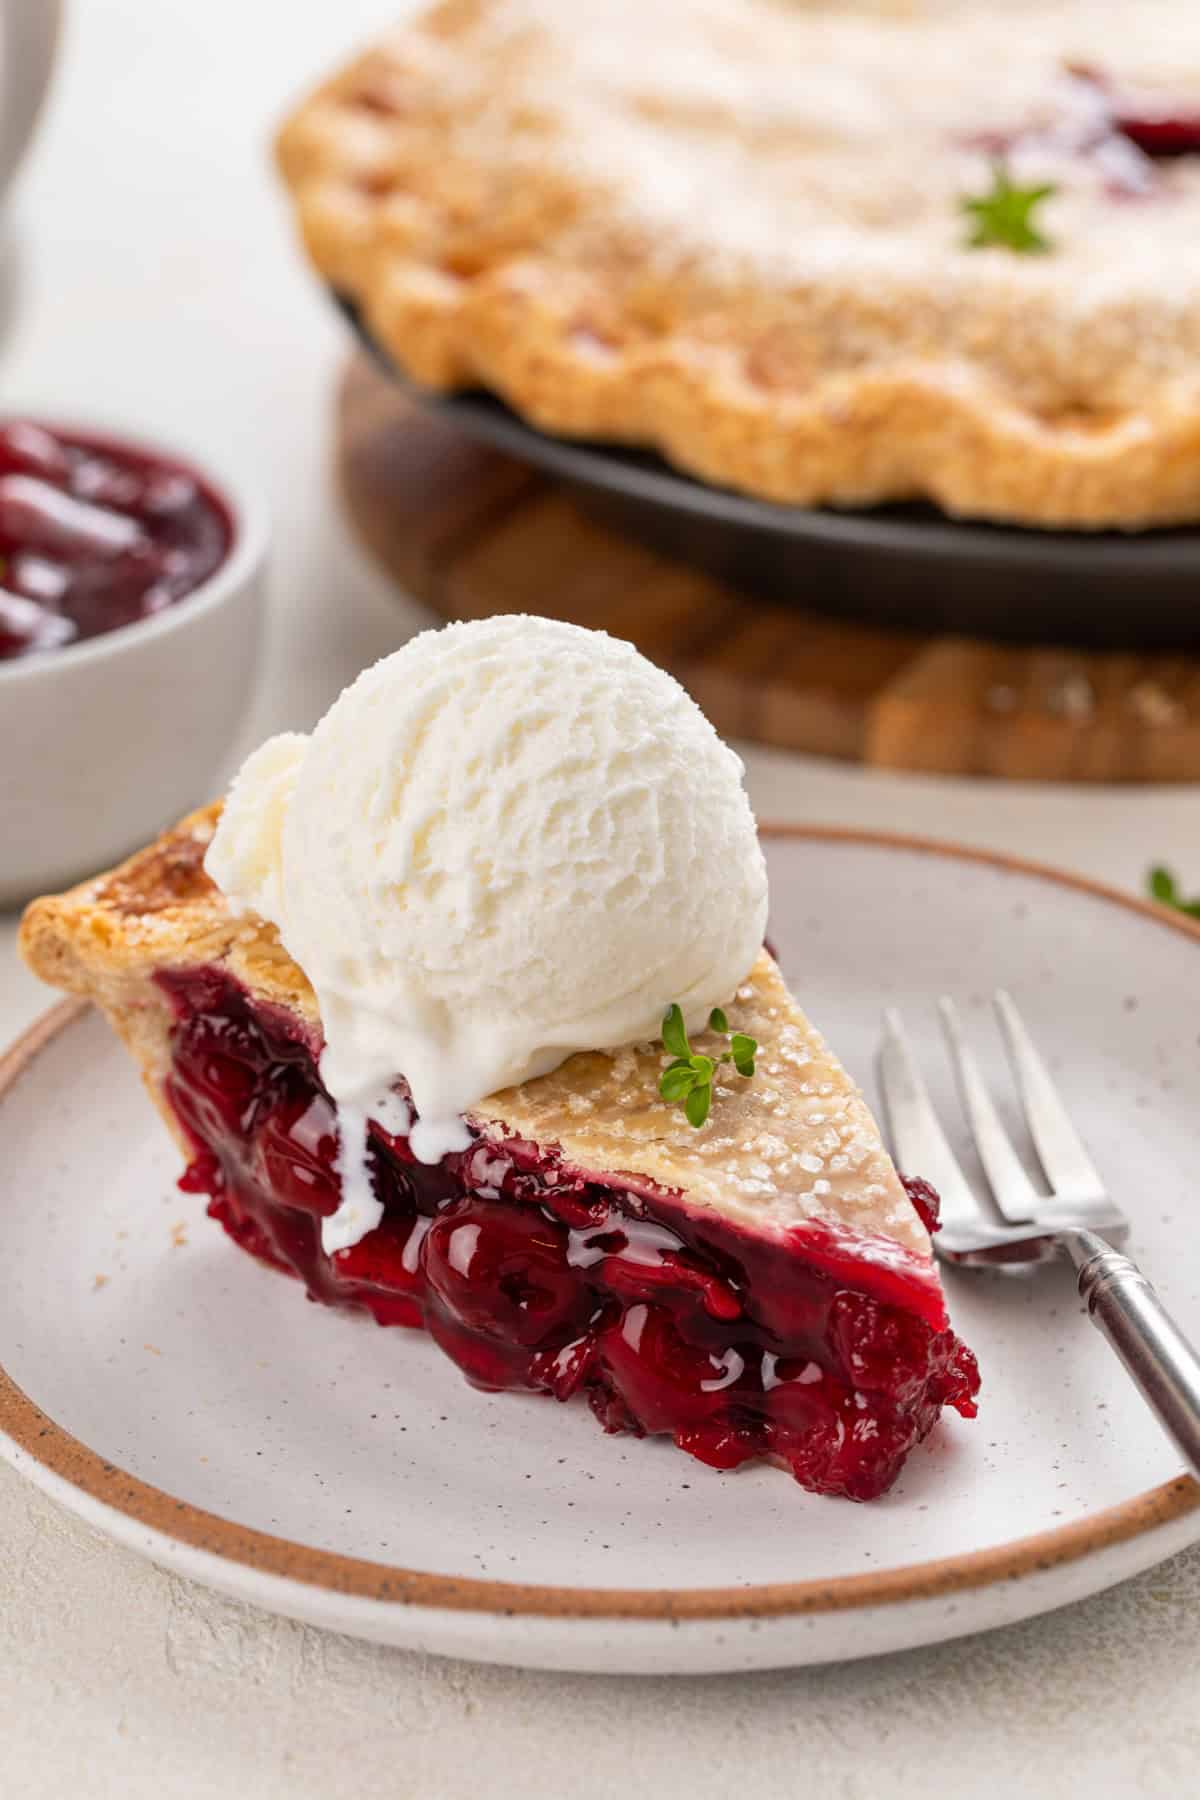 Slice of sour cherry pie a la mode on a plate.